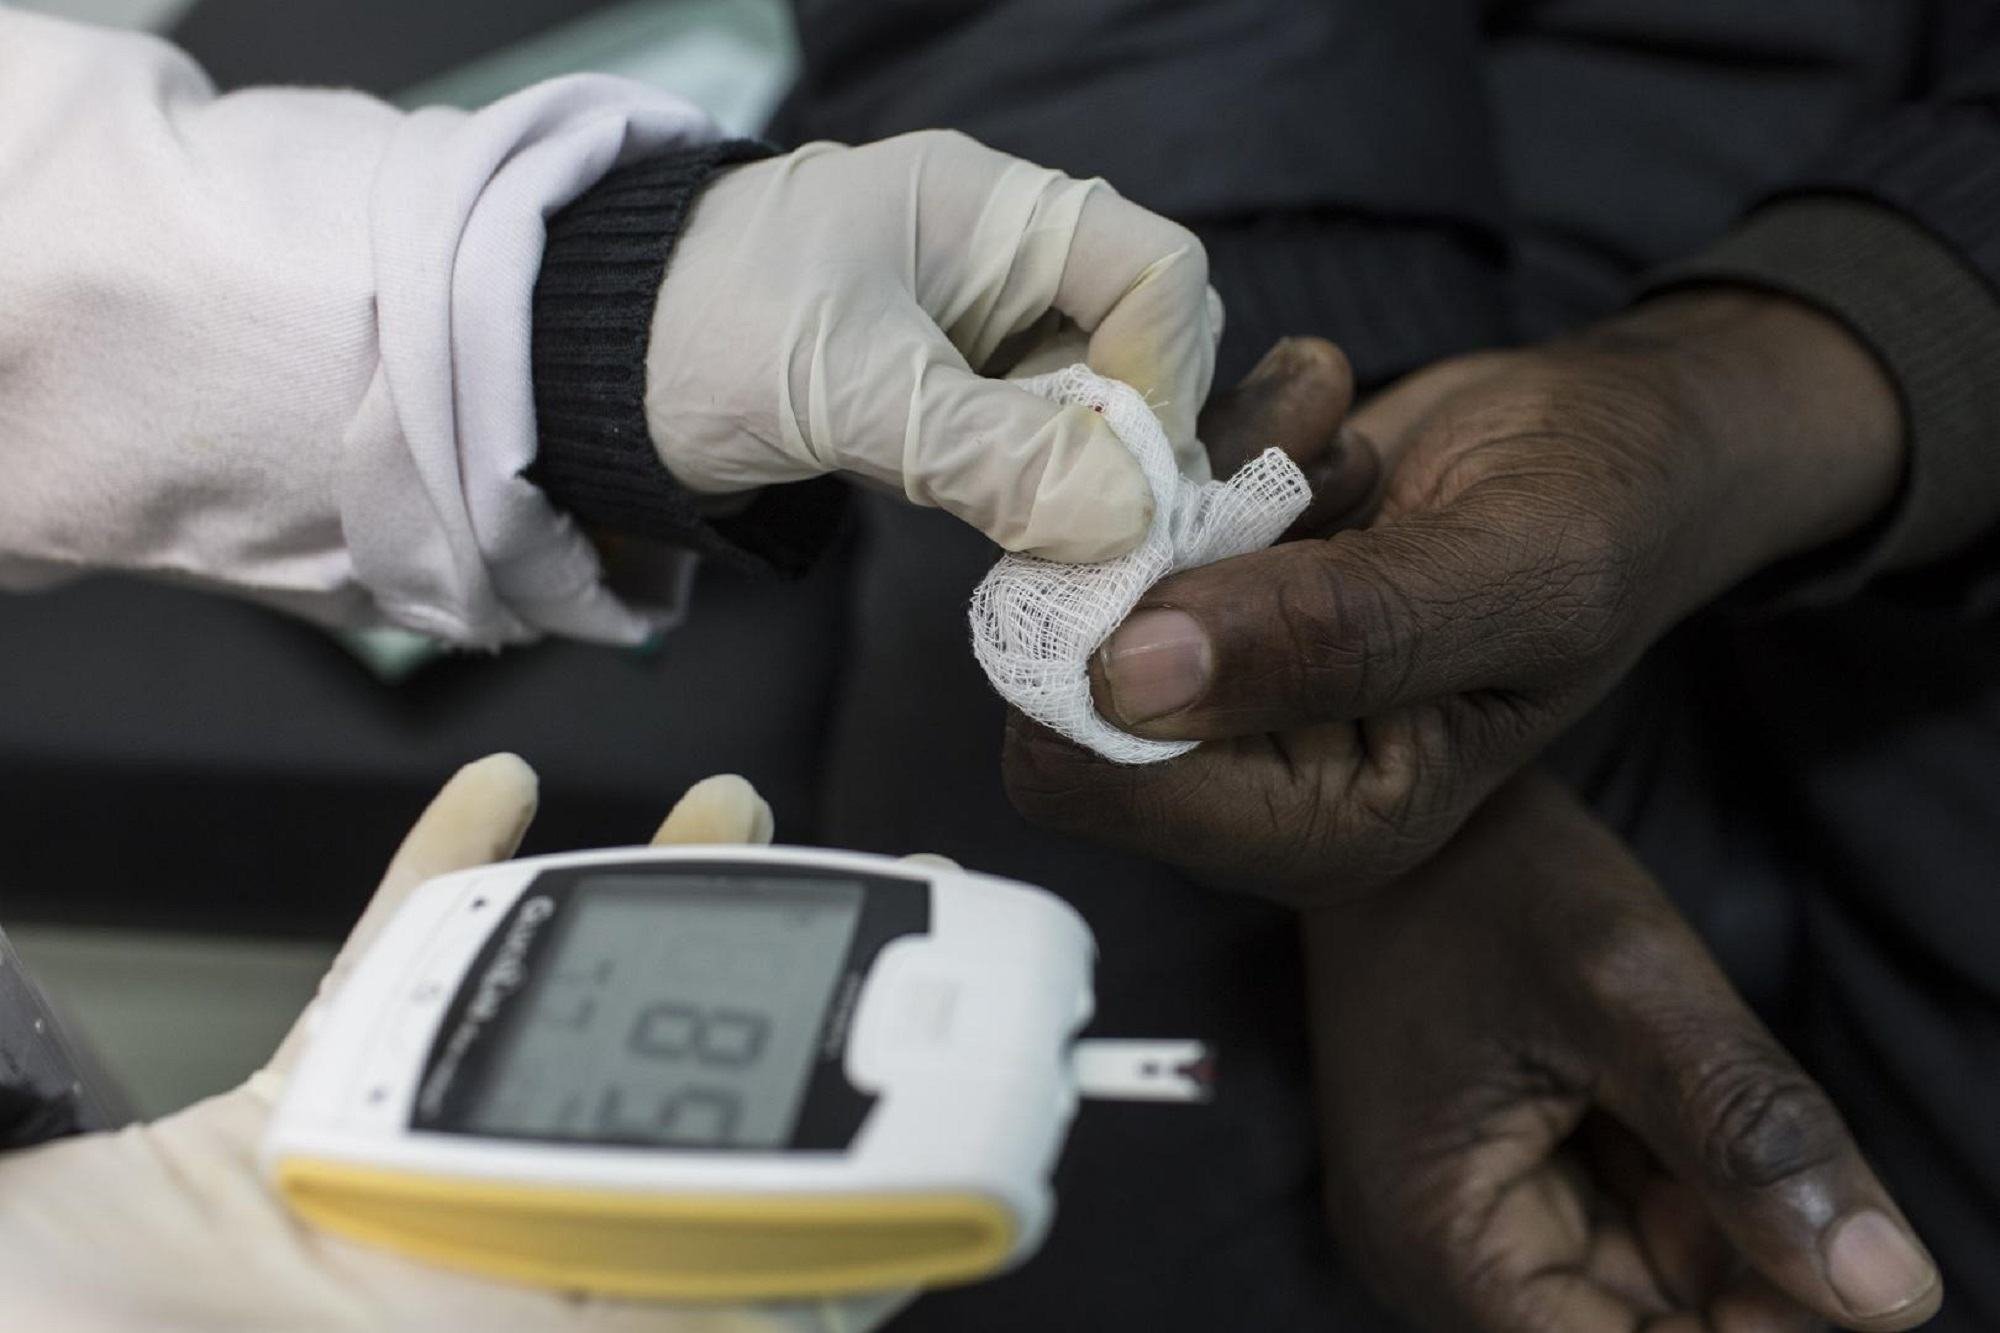 Diabetes cases rising worldwide, WHO reports